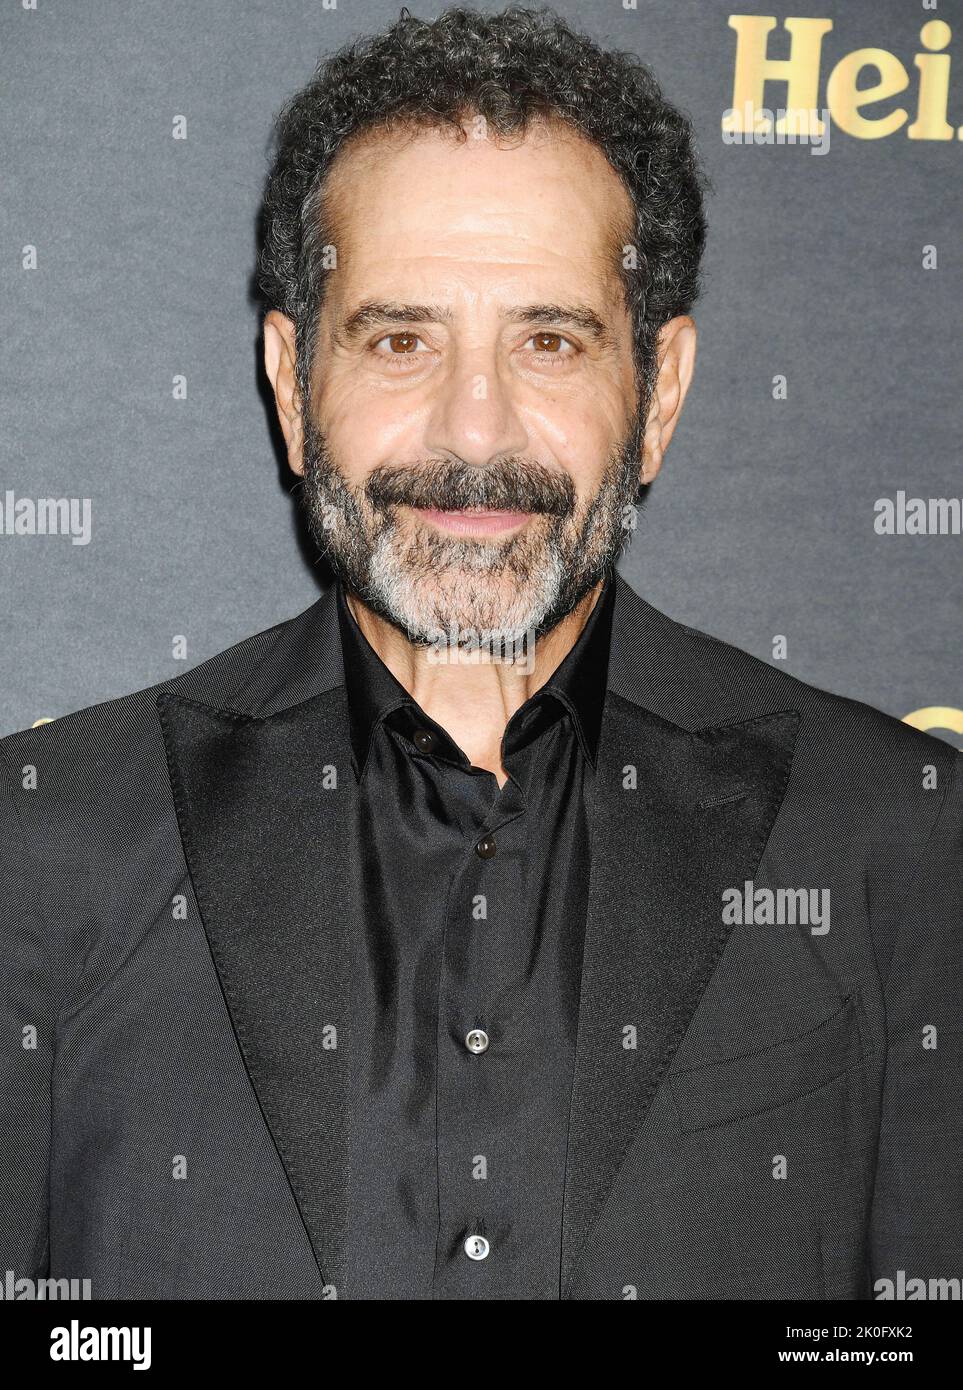 Los Angeles, Ca. 10th Sep, 2022. Tony Shalhoub attends The Hollywood Reporter SAG-AFTRA Emmy Party at a private condo residence on September 10, 2022 in Los Angeles, California. Credit: Jeffrey Mayer/Jtm Photos/Media Punch/Alamy Live News Stock Photo